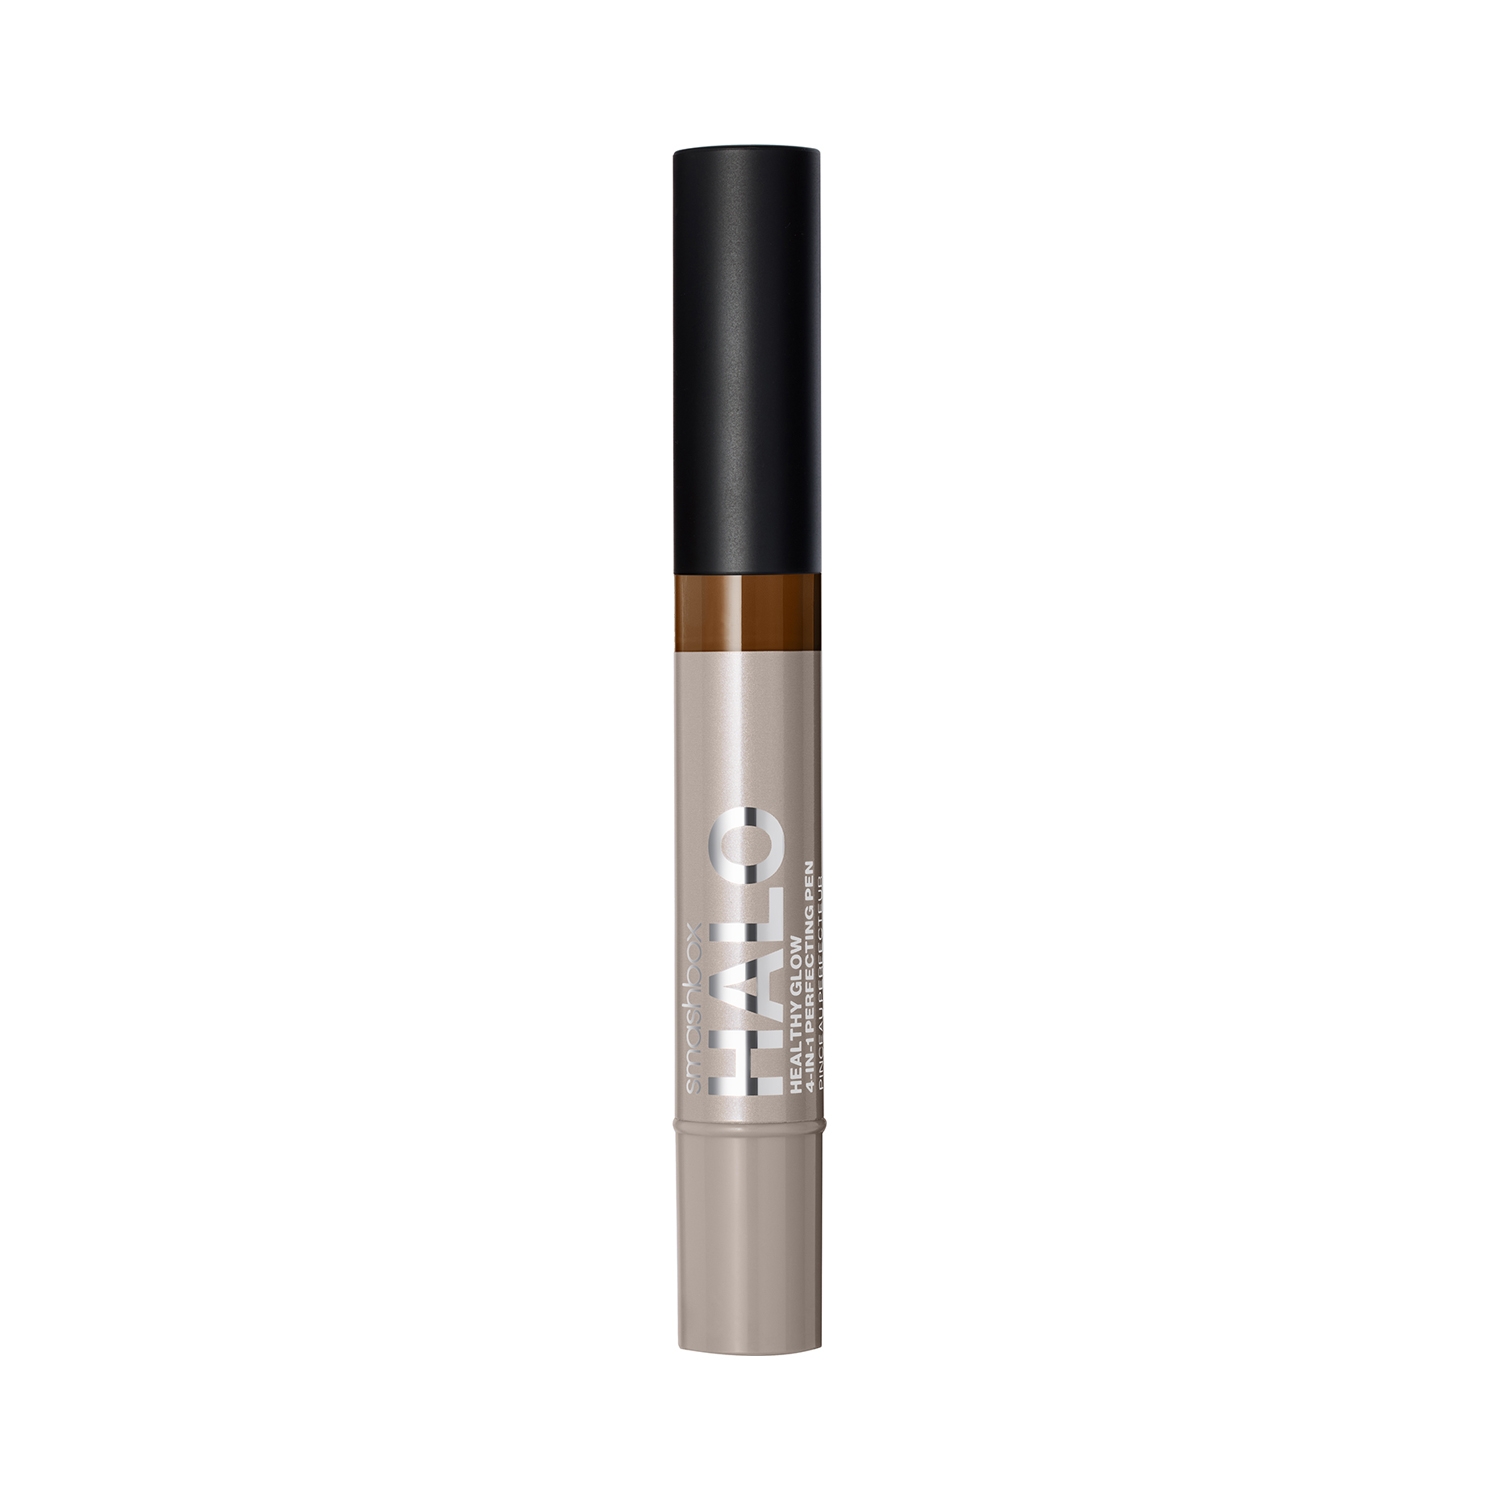 Smashbox | Smashbox Halo Healthy Glow 4-In-1 Perfecting Concealer Pen - D10N (3.5ml)